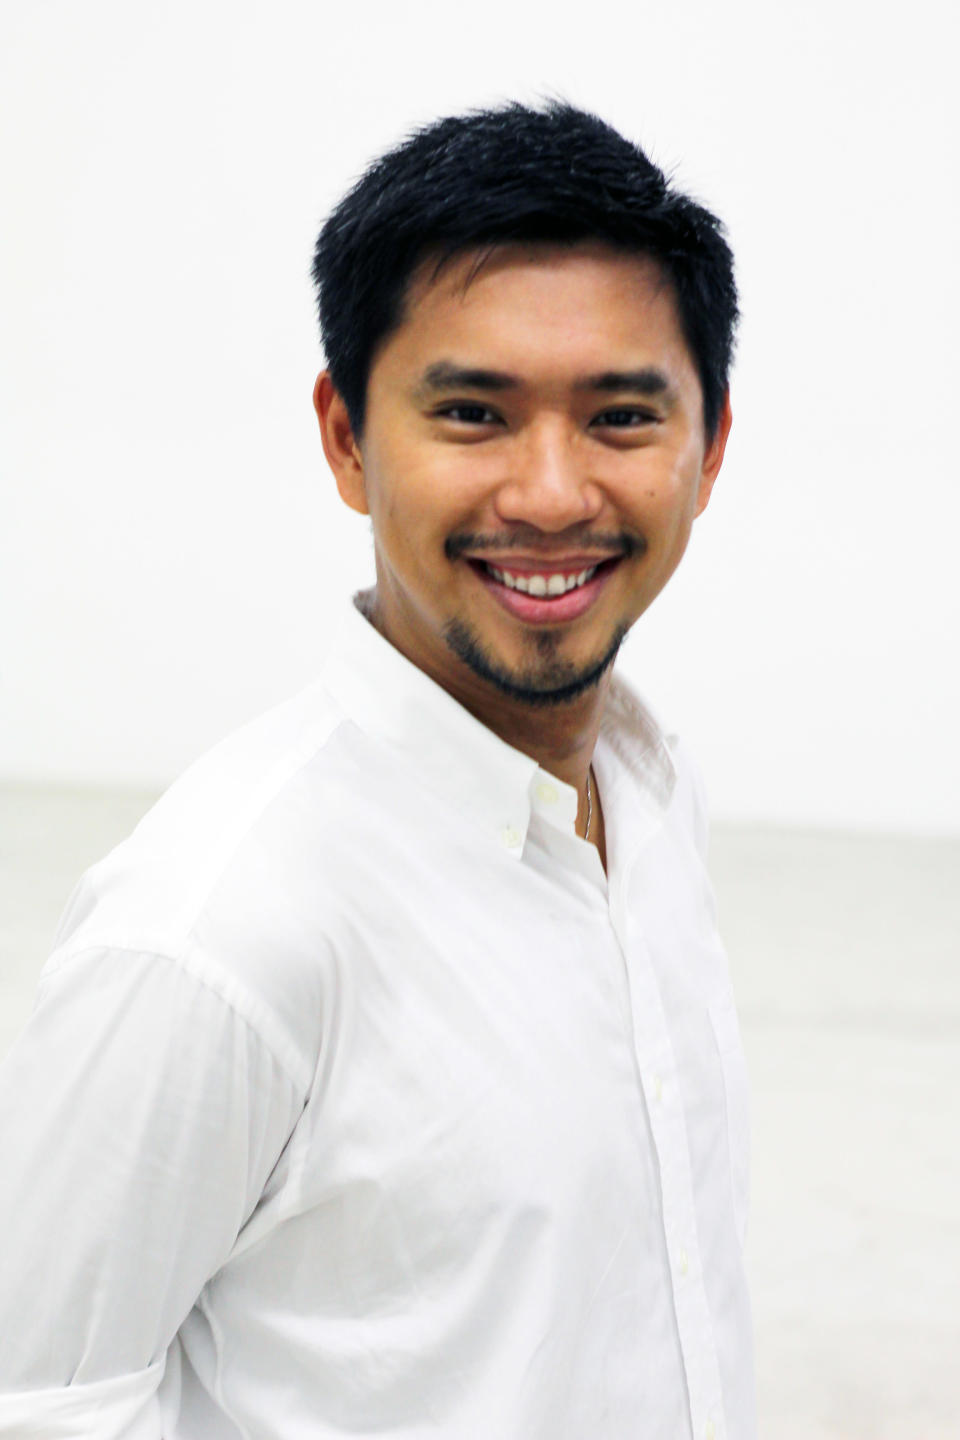 <b><p>Martin Tan, 35</p></b> <b><p>Co-Founder and Executive Director, Halogen Foundation Singapore</p></b> <br> <p>Martin Tan is the Co-founder and Executive Director of Halogen Foundation Singapore. He formerly served as Board Member of National Library Board and Chairman of the Public Library Advisory Committee.</p> <br> <p>Martin was awarded the Outstanding Young Person Award by Junior Chamber International in 2007 and authored “Youth Sector Organisations: Starters Kit” published by the National Youth Council in 2010. He is currently the Honorary Secretary of the National Family Council, Deputy Chairperson of Marriage Central Advisory Board and Chairman of Youth Connect. Martin is a Council Member of the 12th National Youth Council, currently chairs Shine Youth Festival and serves as a committee member of the Youth Network.</p> <br> <p>Martin has a big heart for building young leaders. He bravely started Halogen and weathered all the ups and downs over the years to see youths lead themselves and others well. He also regularly trains youths, educators and parents. Martin is also a Master Facilitator for The Leadership Challenge® and the only Master Facilitator certified to run the Student Leadership Challenge® Certification in Asia-Pacific.</p>